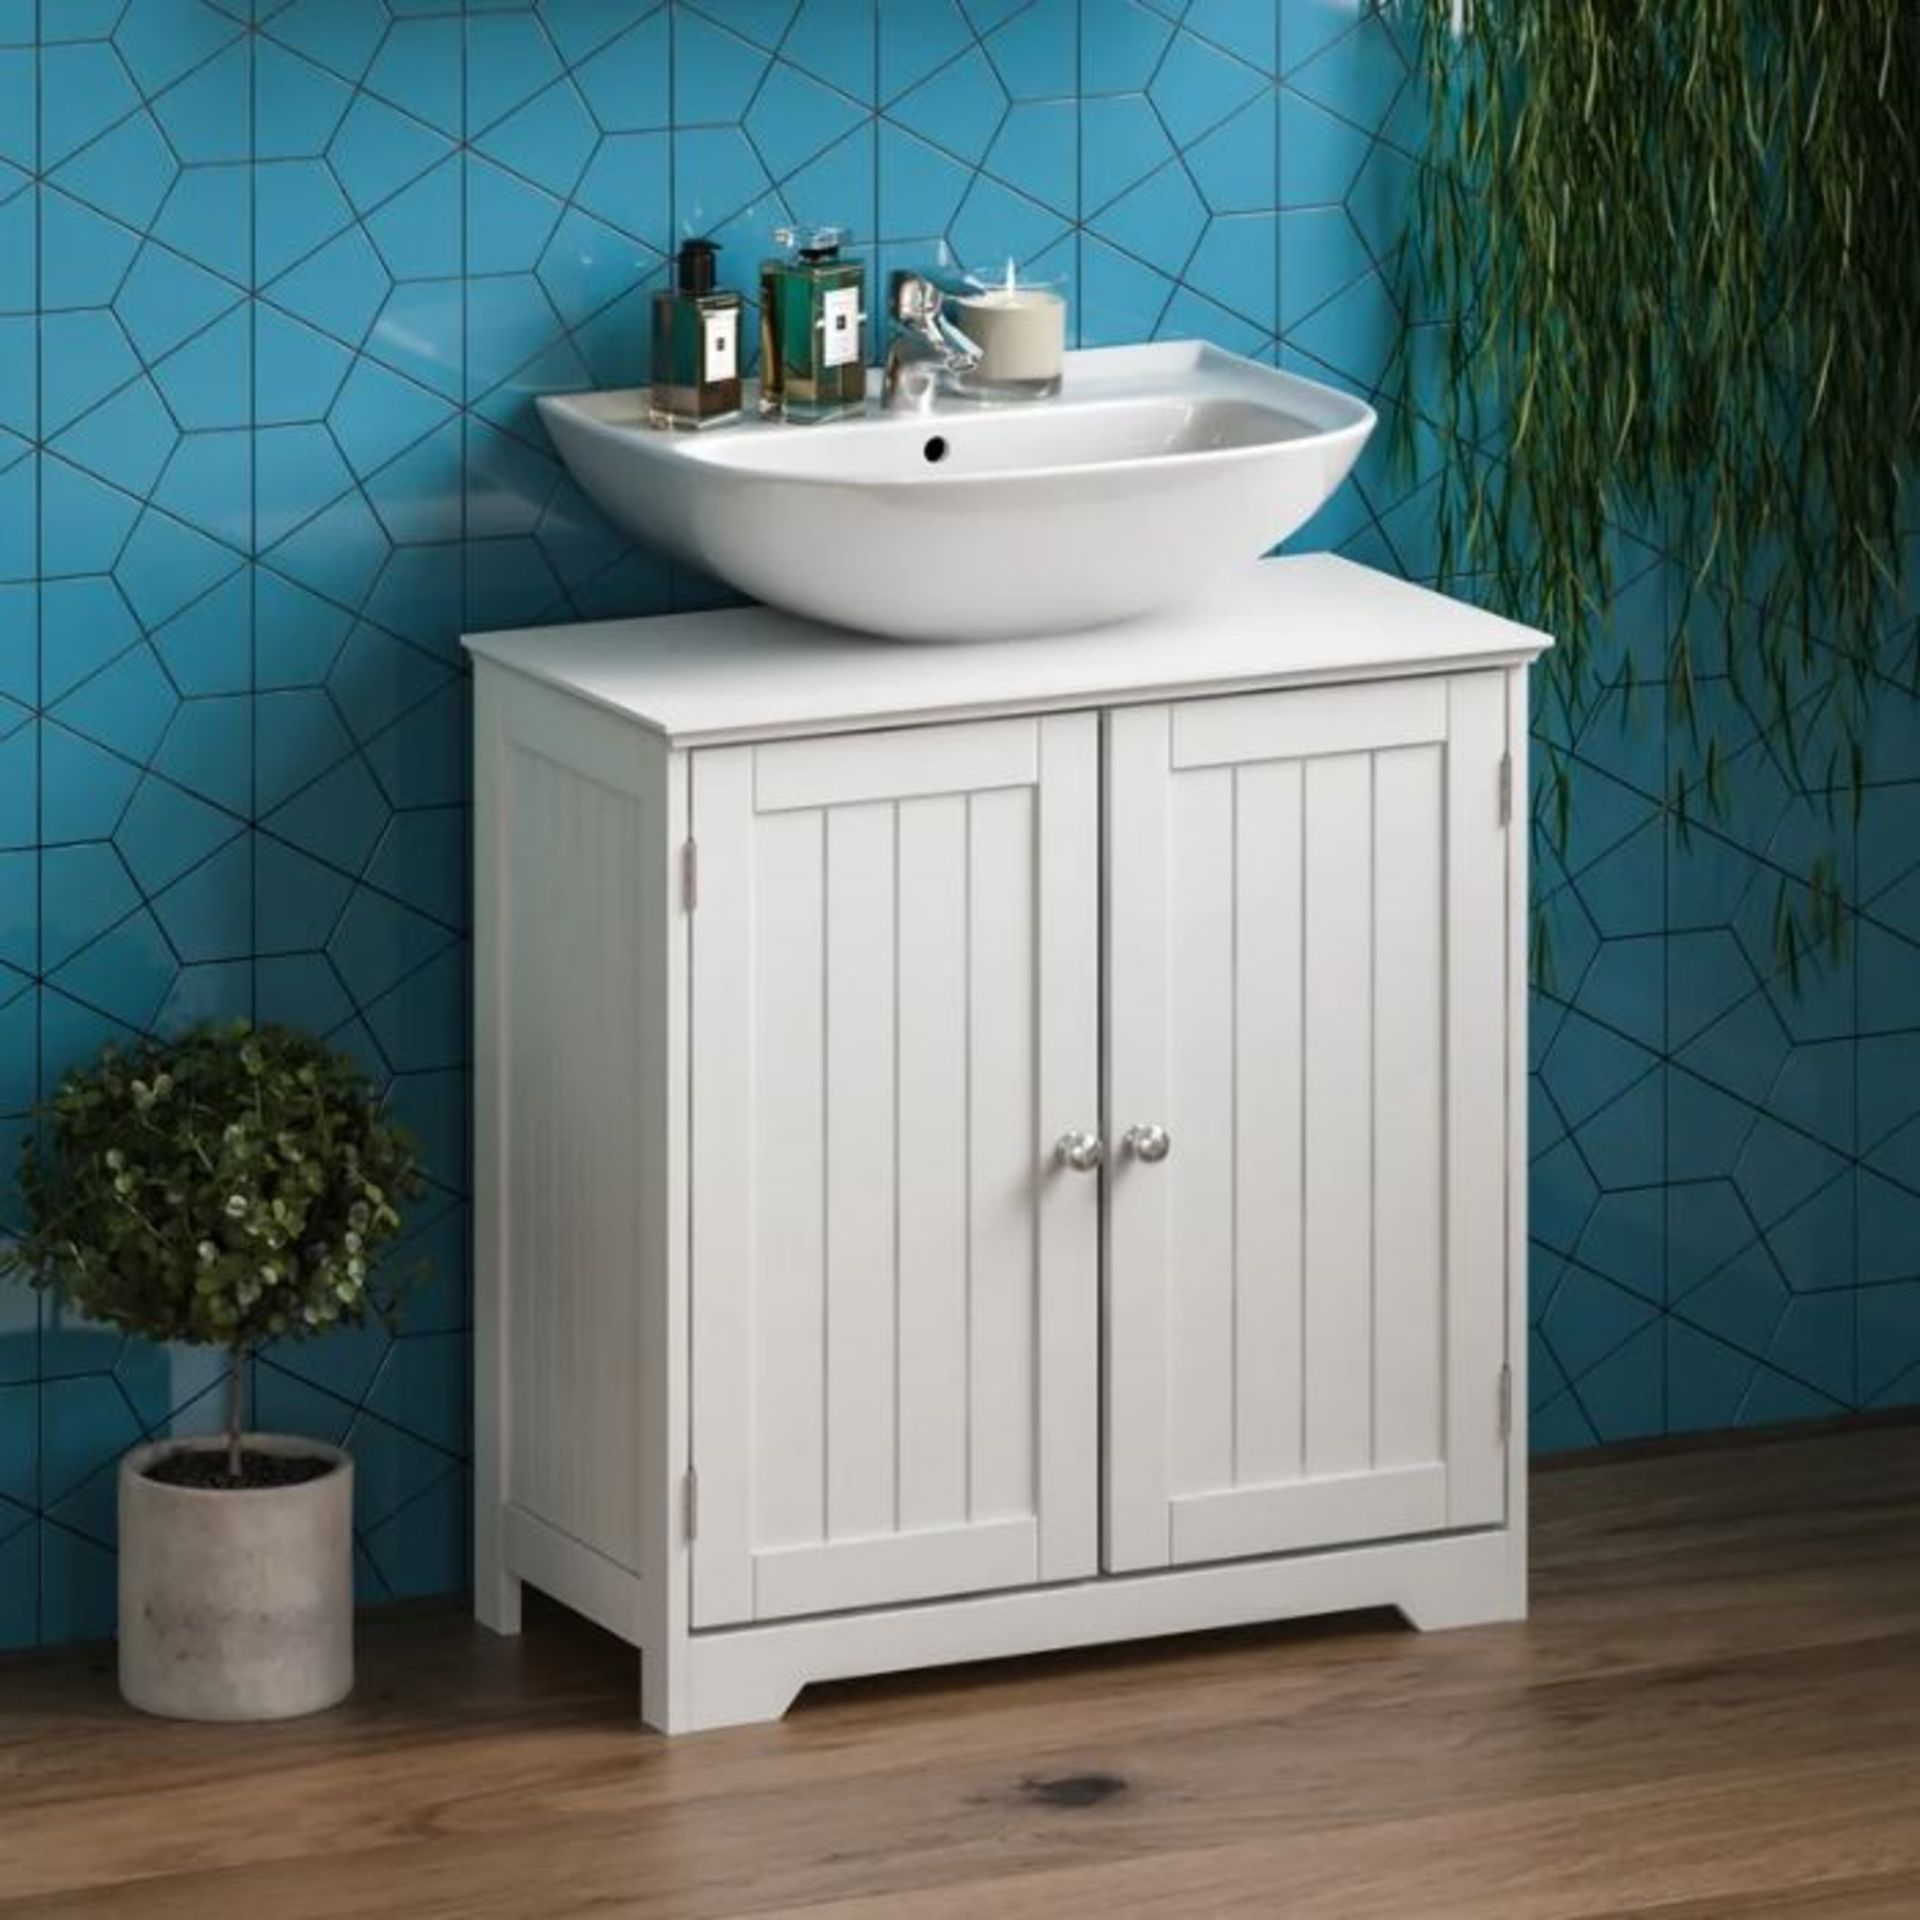 House of Hampton,60cm Under Sink Storage Unit (WHITE) (BOXED, RETURN, NOT CHECKED) RRP -£56.99 (